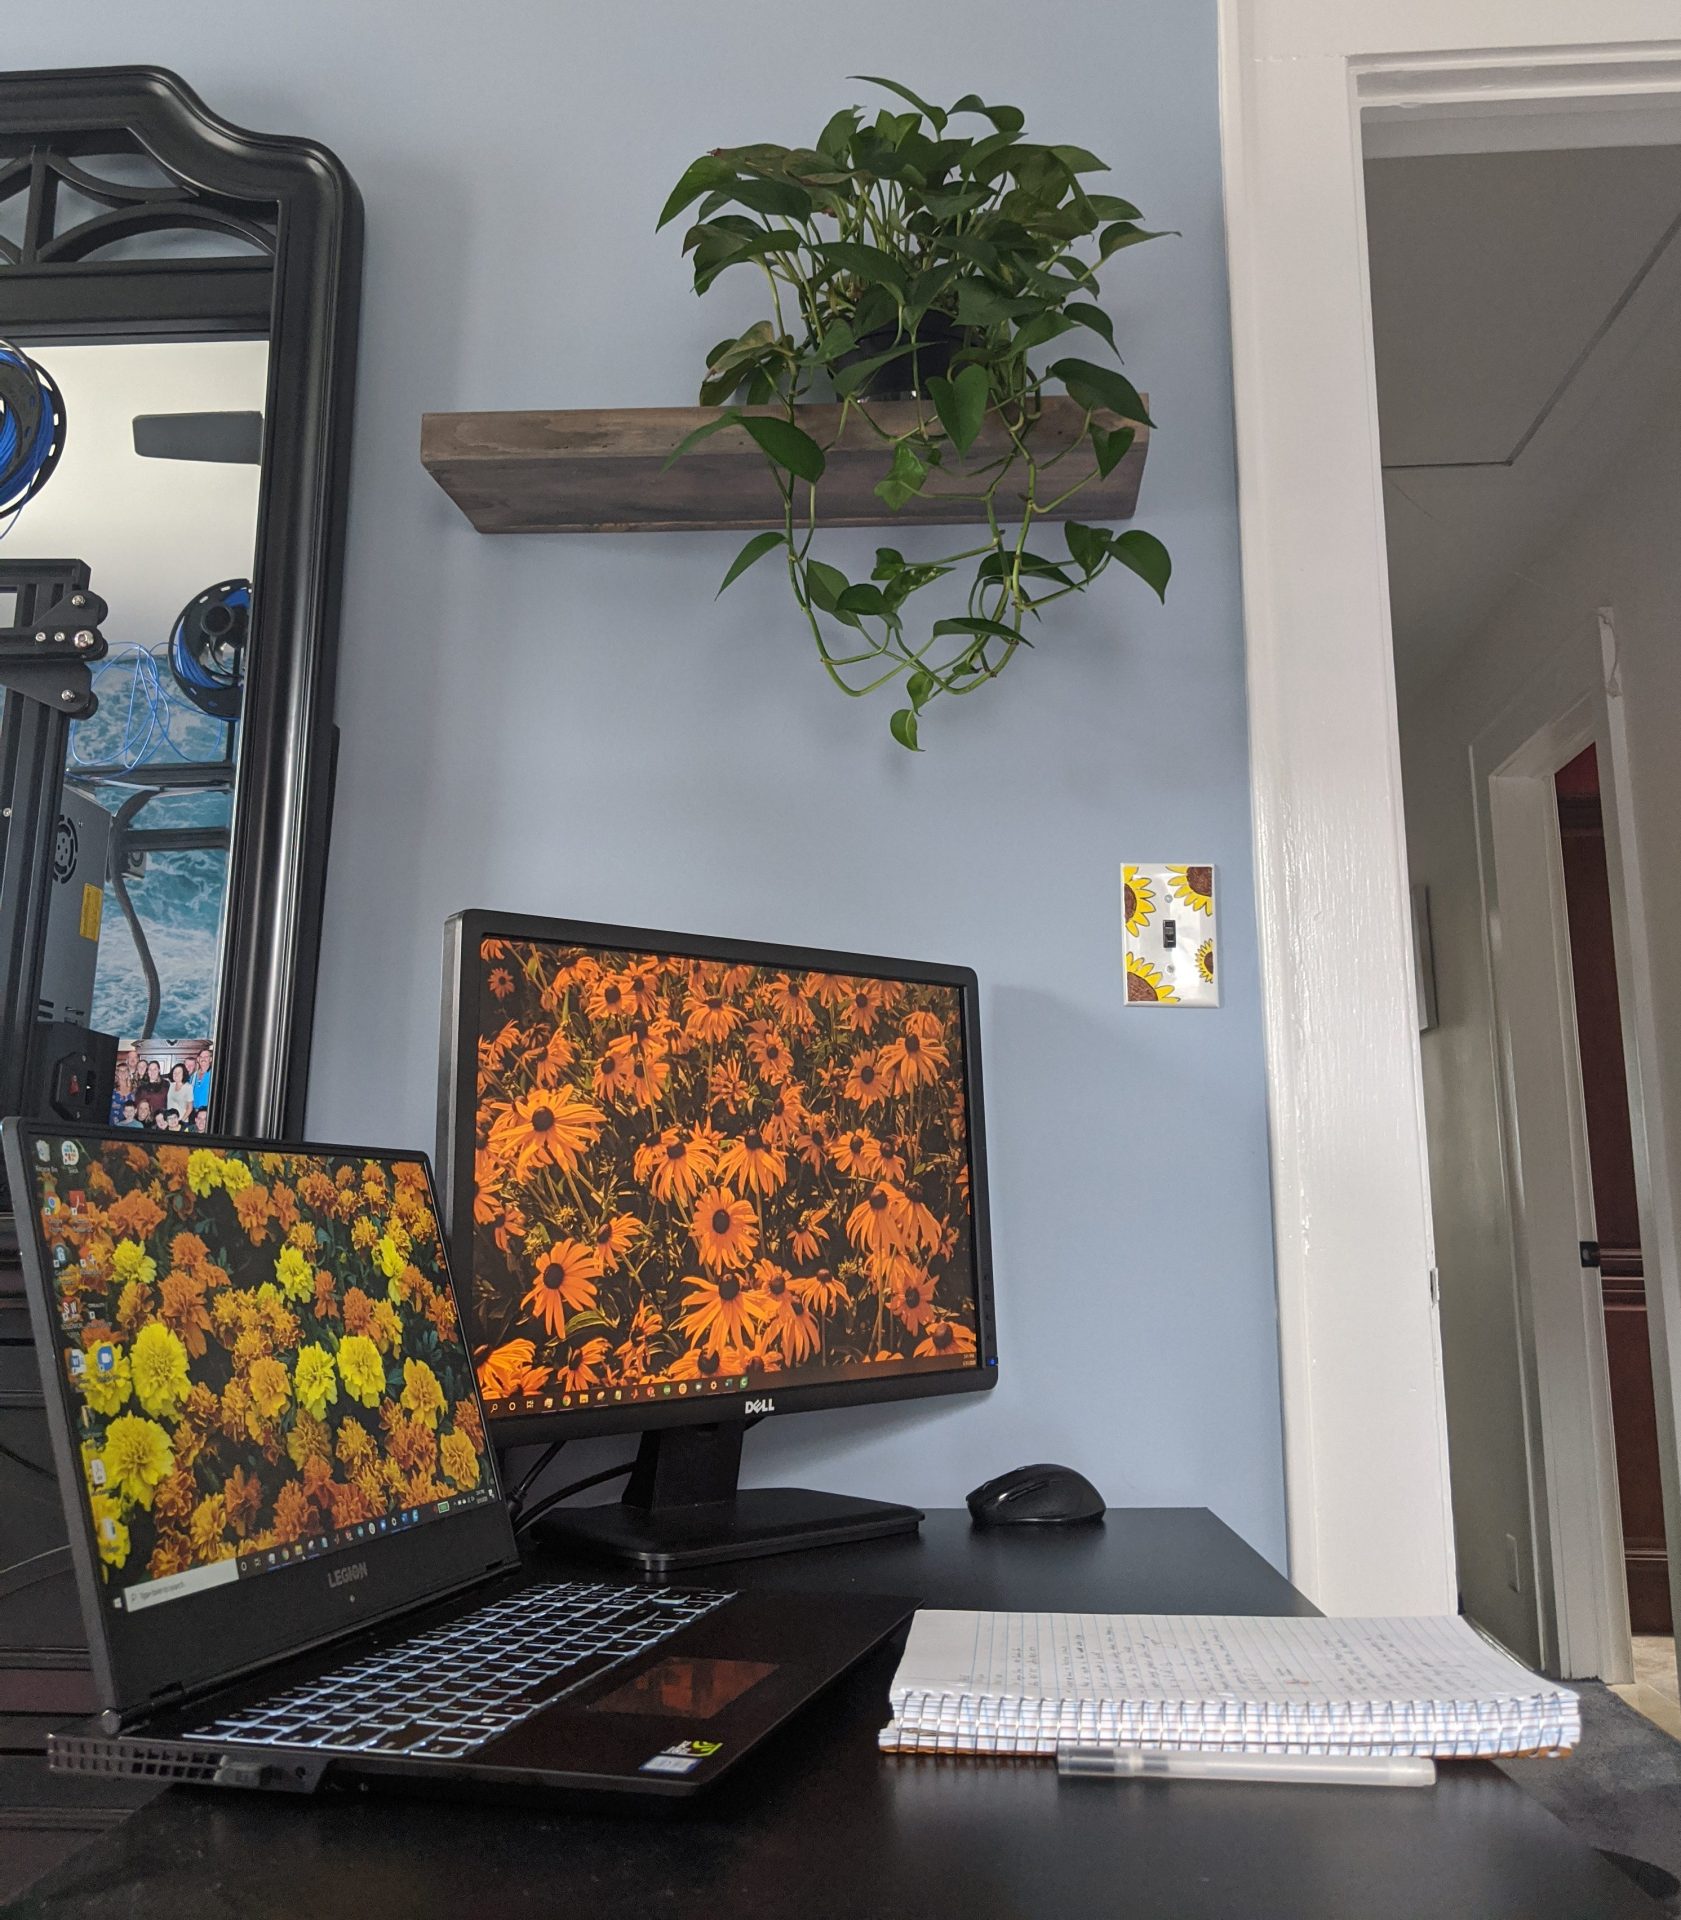 Brittney's home office set up, with two-monitor set up and a plant on a wall ledge.